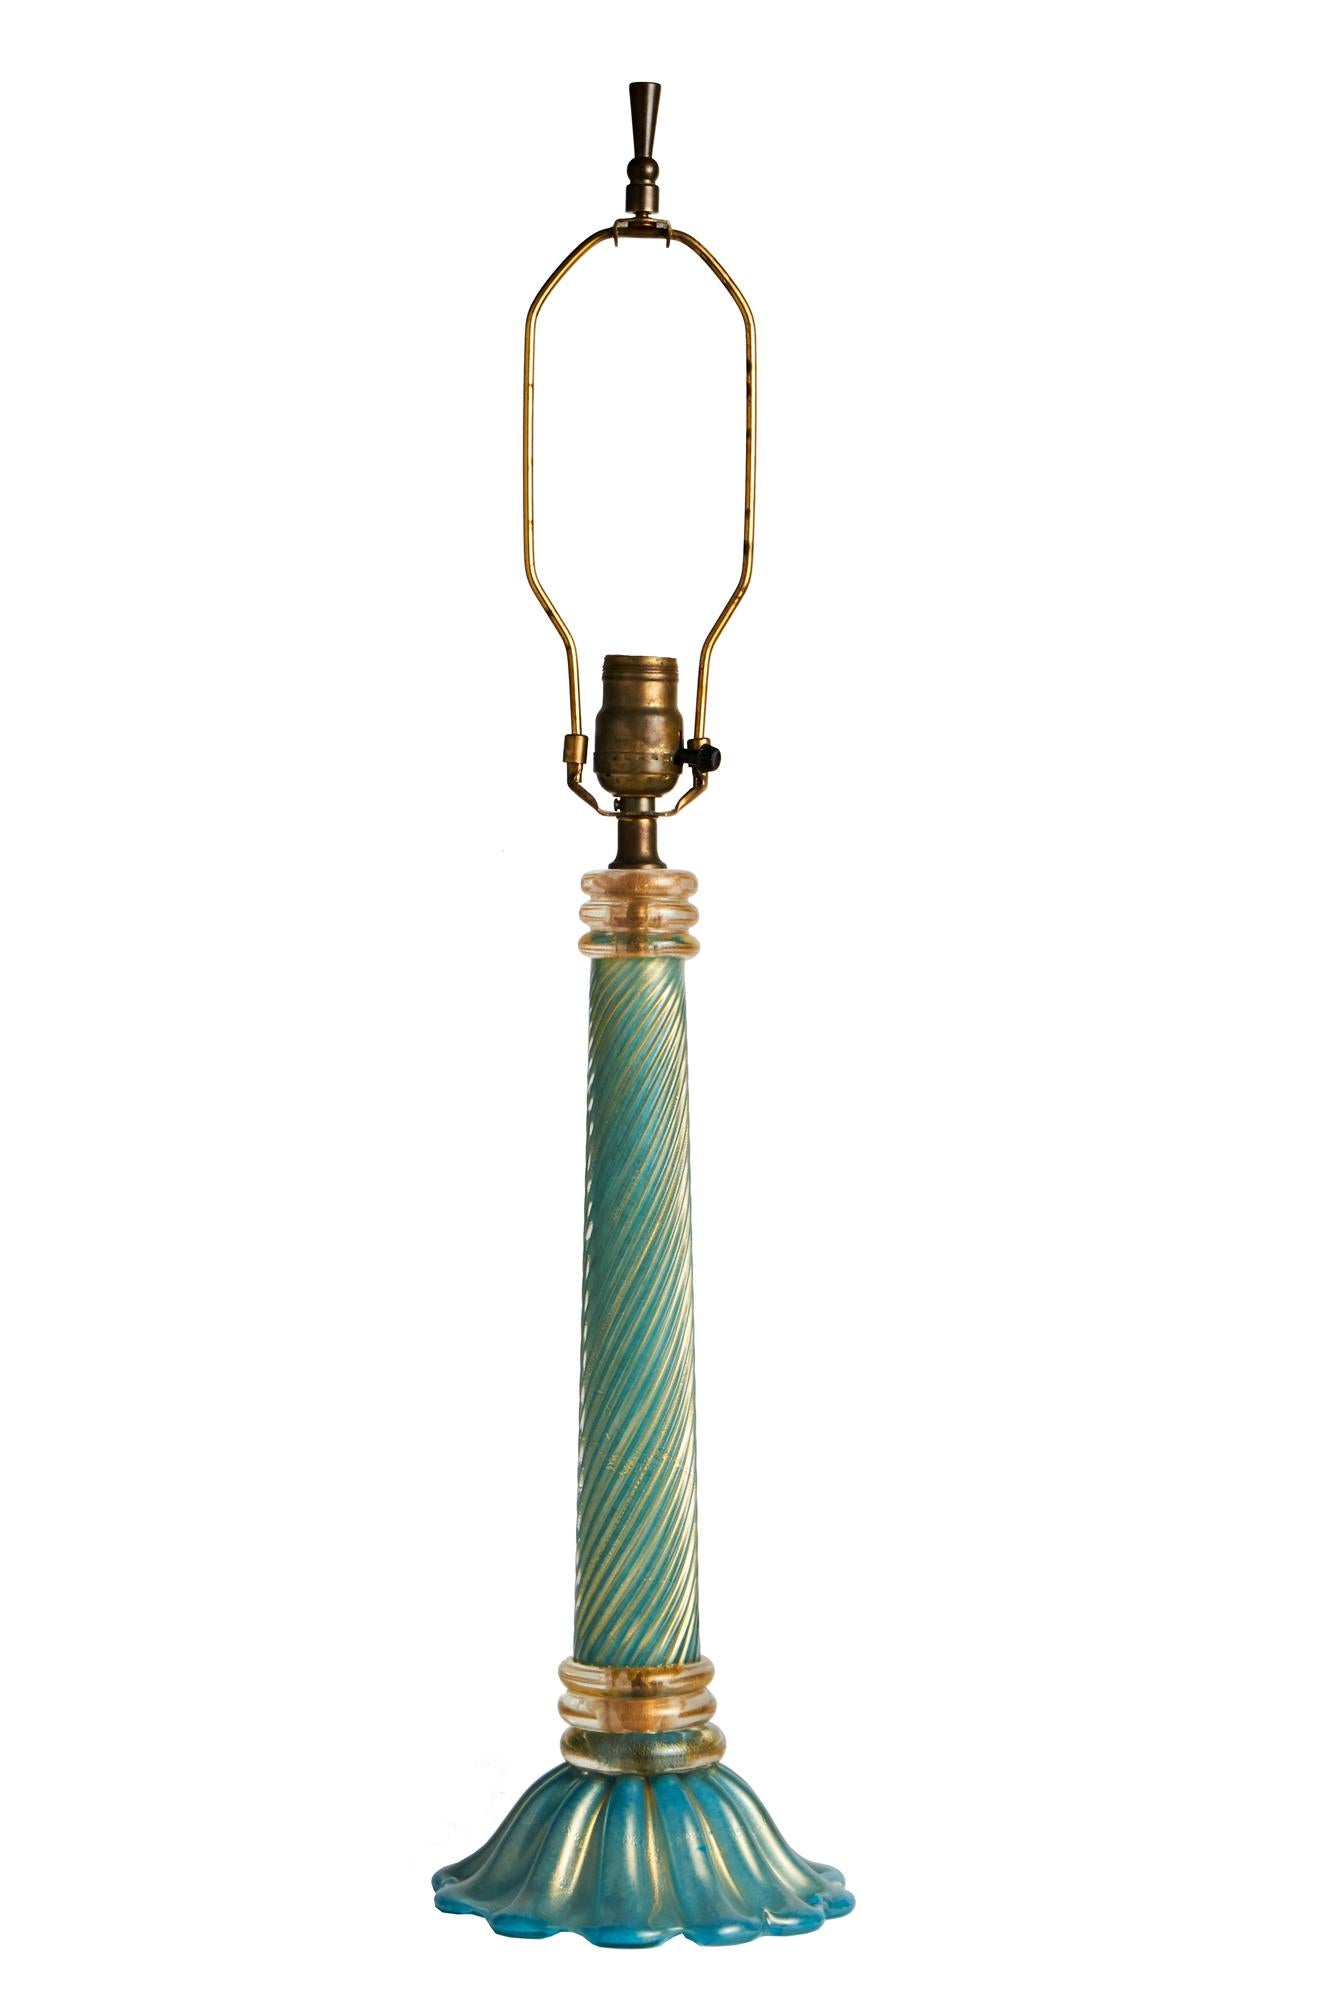 This stunning tall Italian Mid Century, Murano glass table lamp is by Barovier & Toso and features the Coronado d'Ore technique whereby the rare green glass colorway is highlighted with gold inclusions, Its foliate base is capped with three rings of